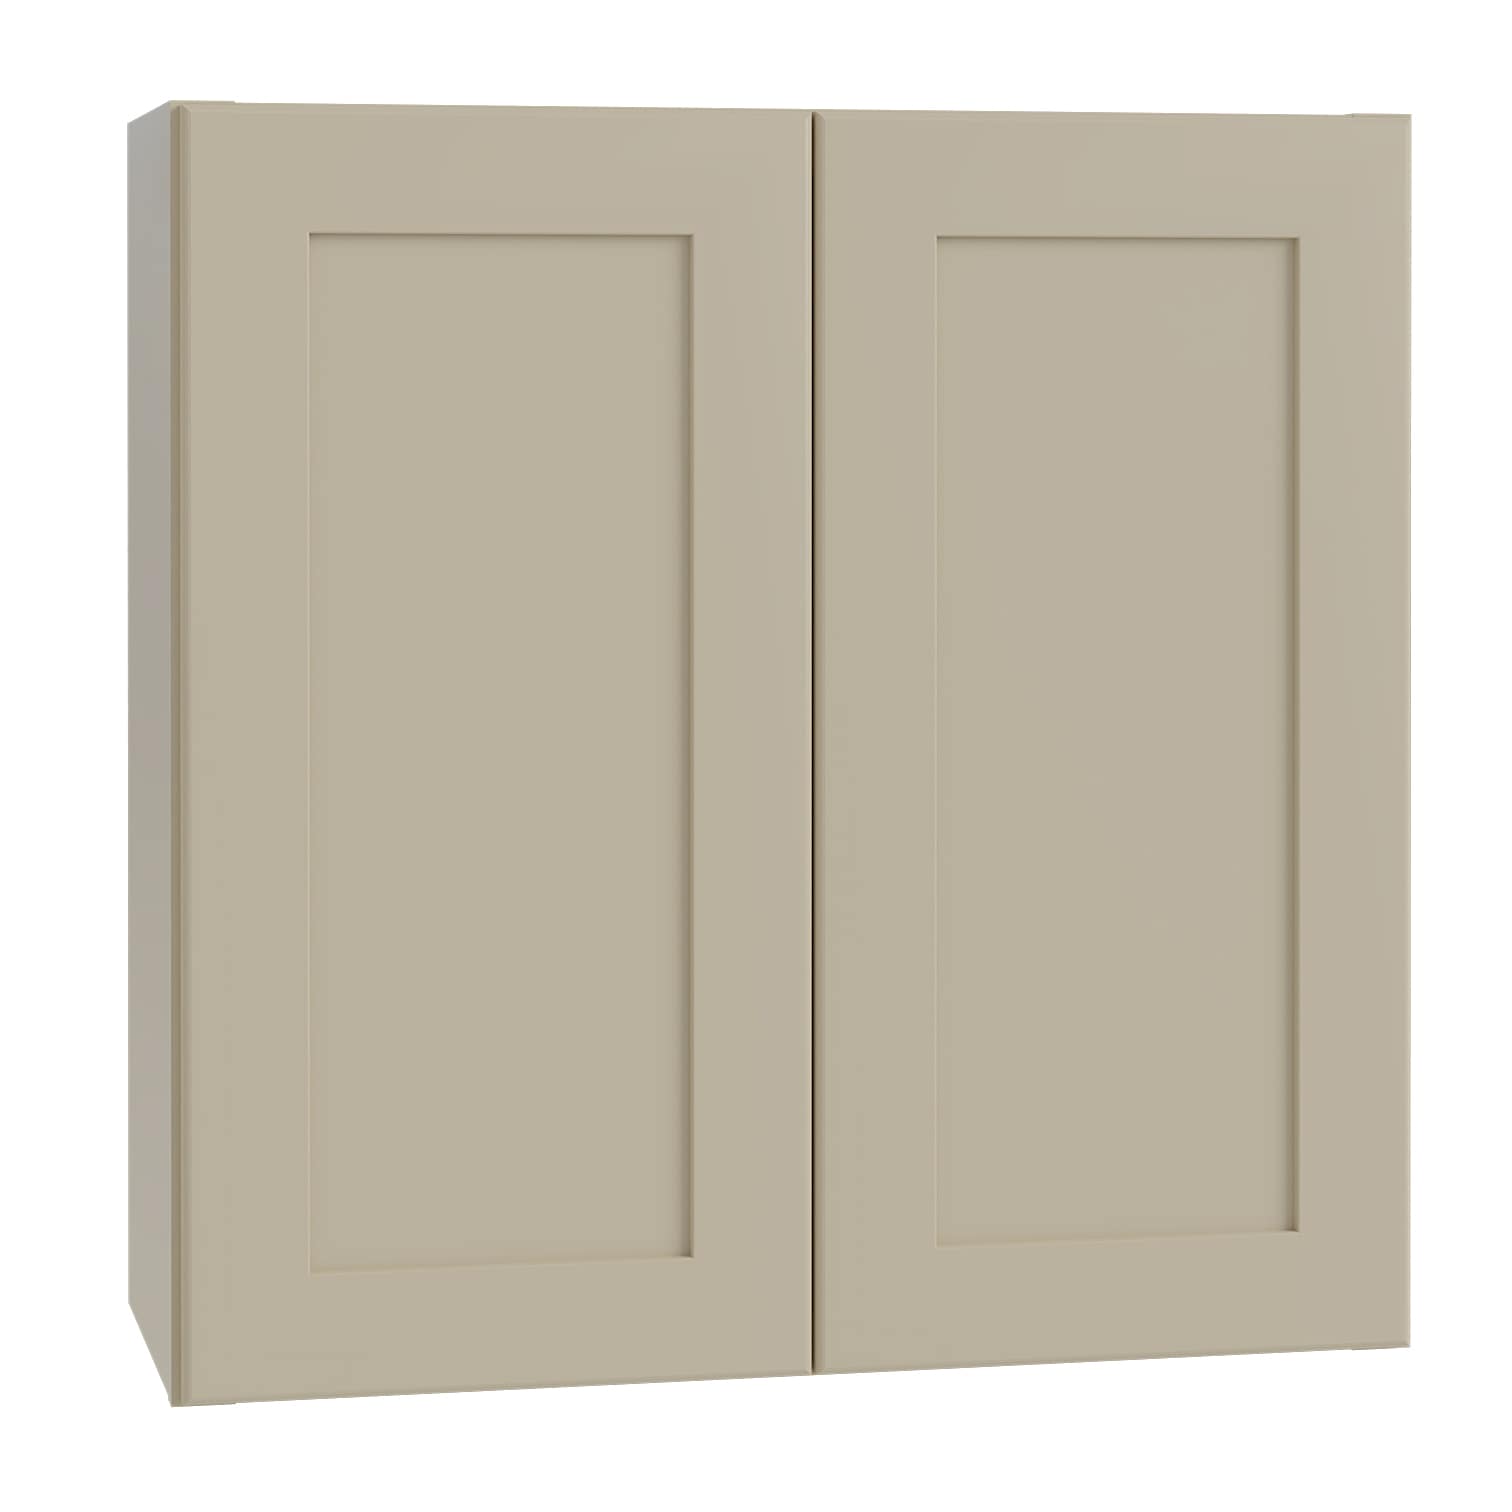 Luxxe Cabinetry 33-in W x 30-in 30-in H x 12-in D Norfolk Blended Cream Painted Door Wall Fully Assembled Semi-custom Cabinet in Off-White | W3330-NBC